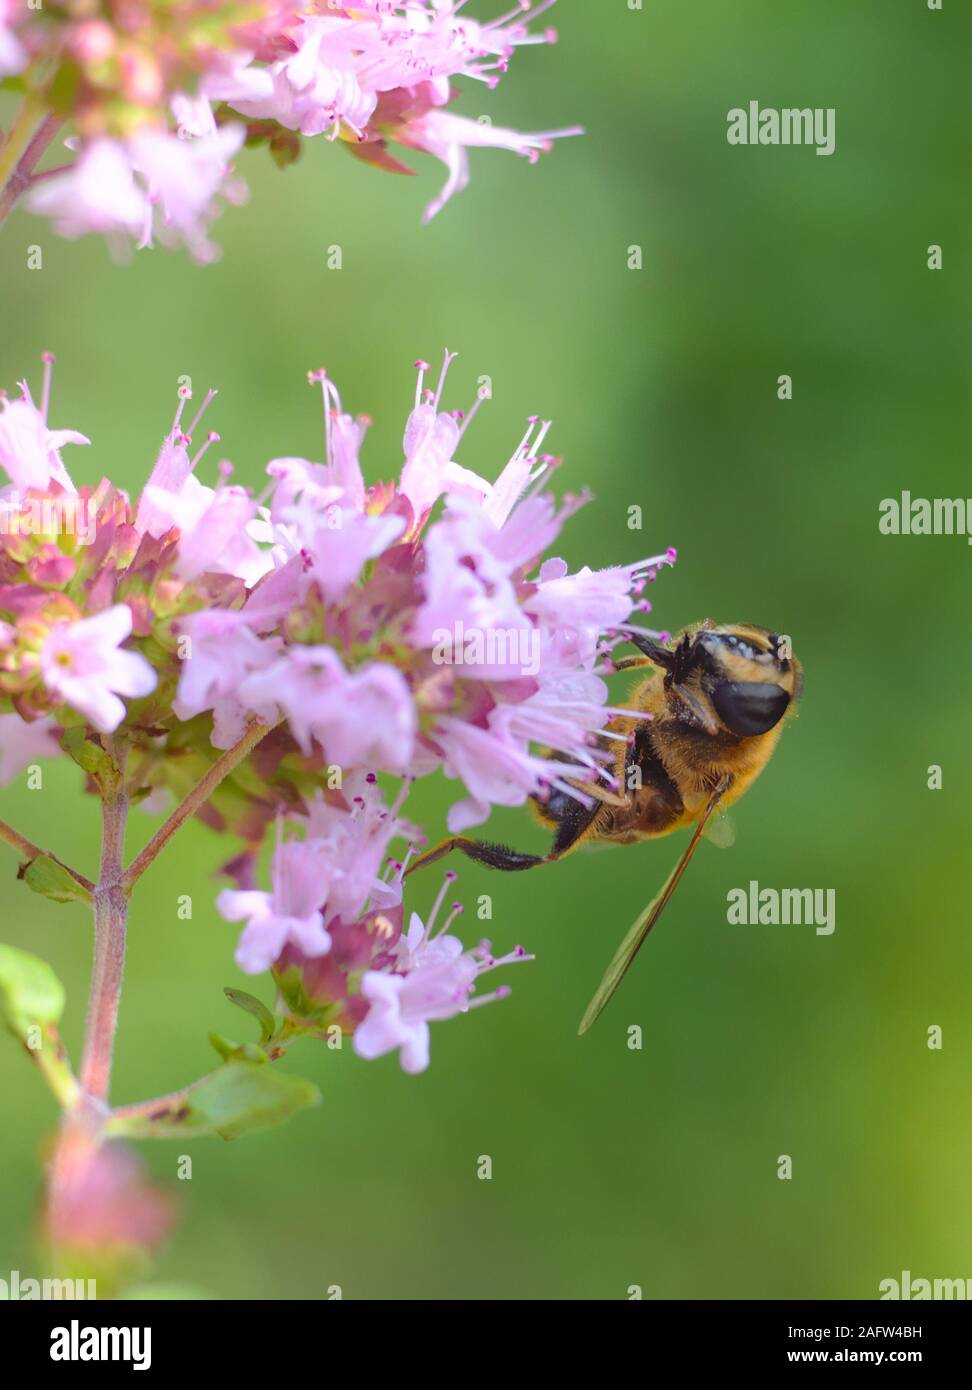 A bee sitting on a flower in front of soft green background Stock Photo